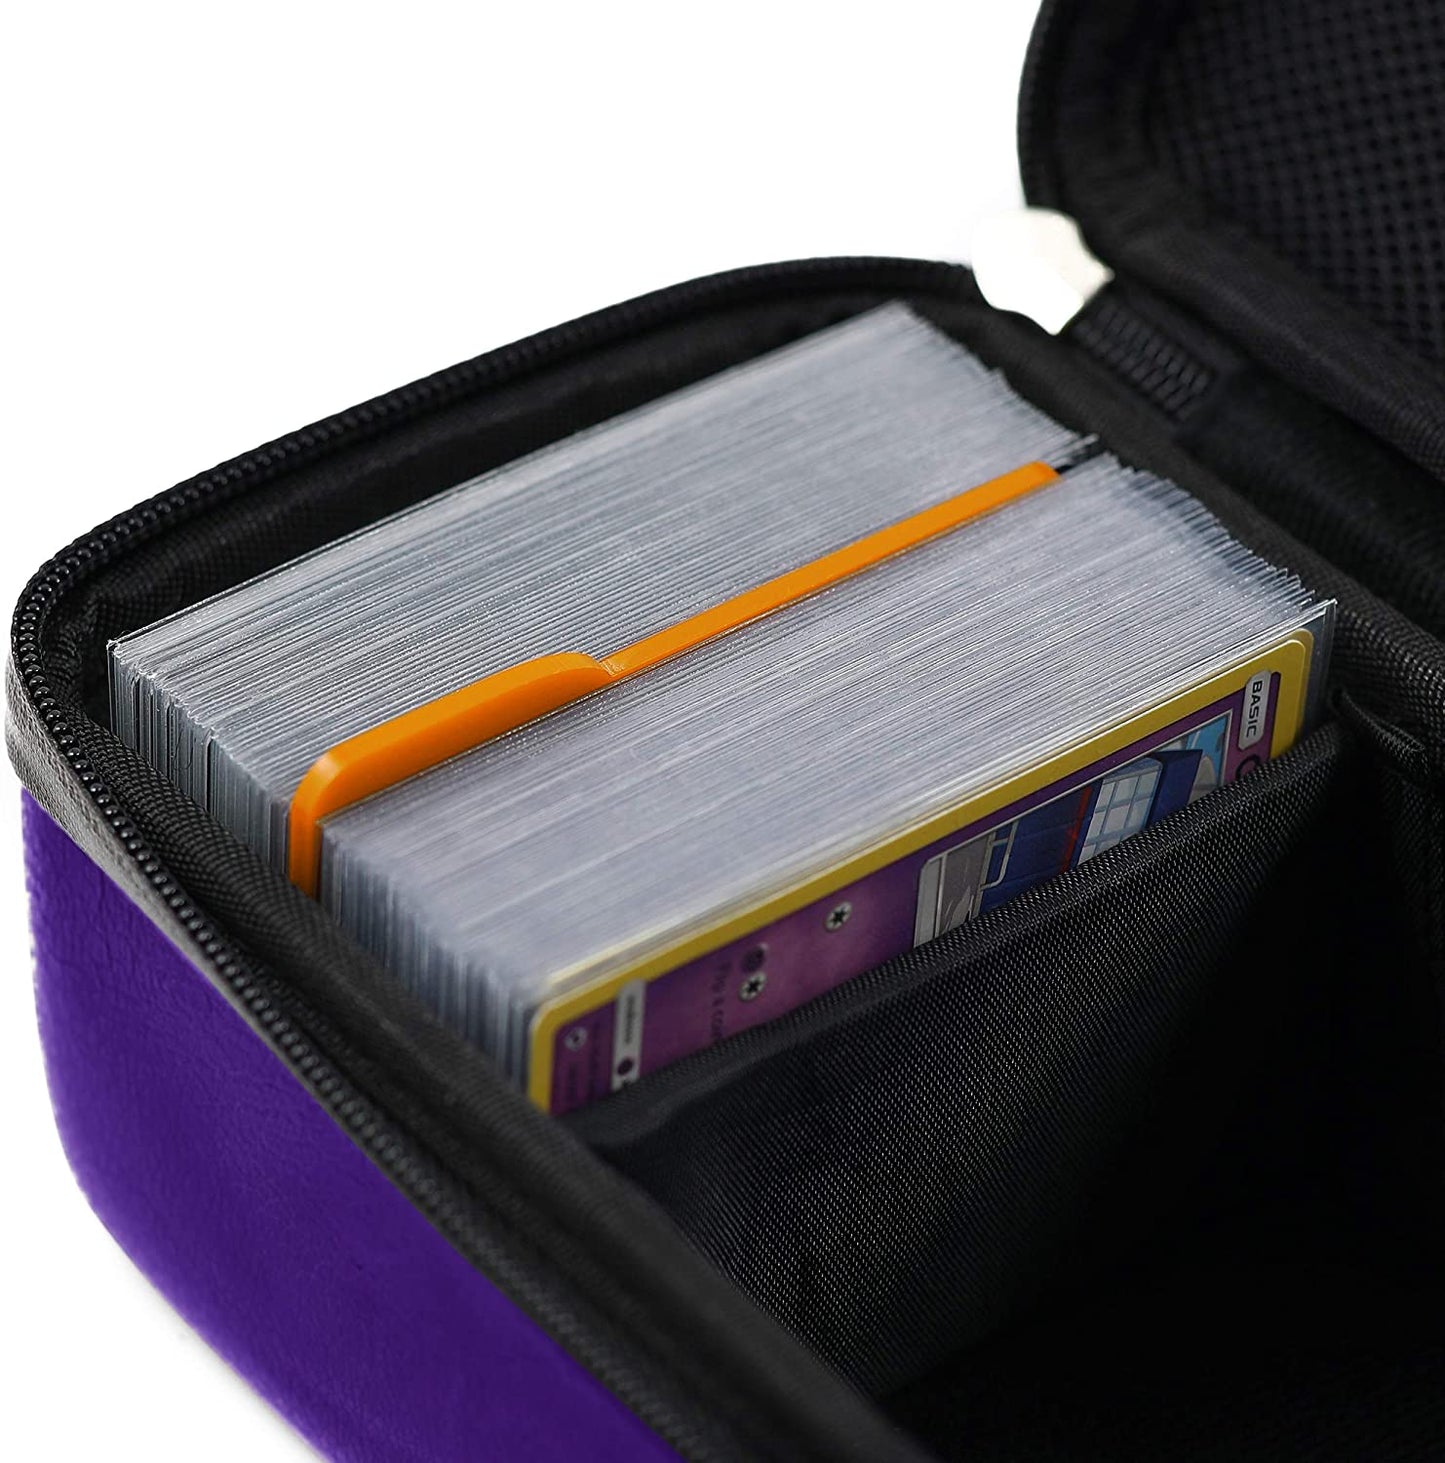 Quiver Time Purple Bolt Collector Card Carrying Case ~ Card/Deck Storage Case with Wrist and Shoulder Strap, Dividers & Separators, Corner Pads + 100 Apollo Card Sleeves ~ Deck Box Bag Compatible